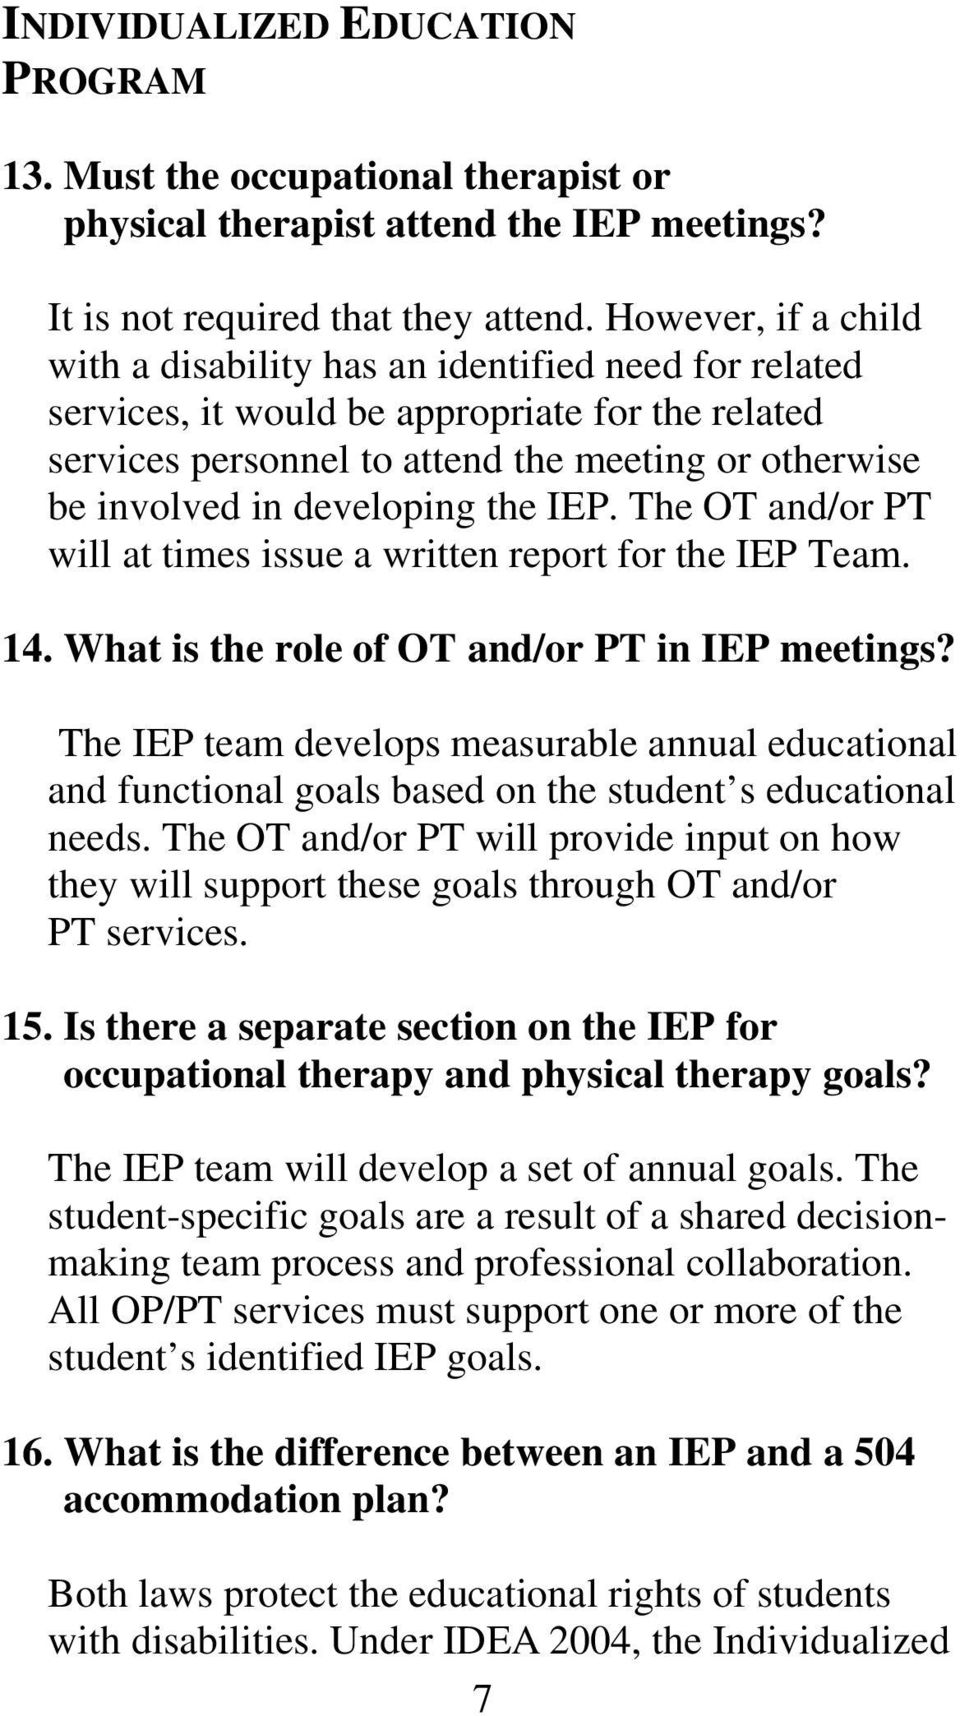 developing the IEP. The OT and/or PT will at times issue a written report for the IEP Team. 14. What is the role of OT and/or PT in IEP meetings?